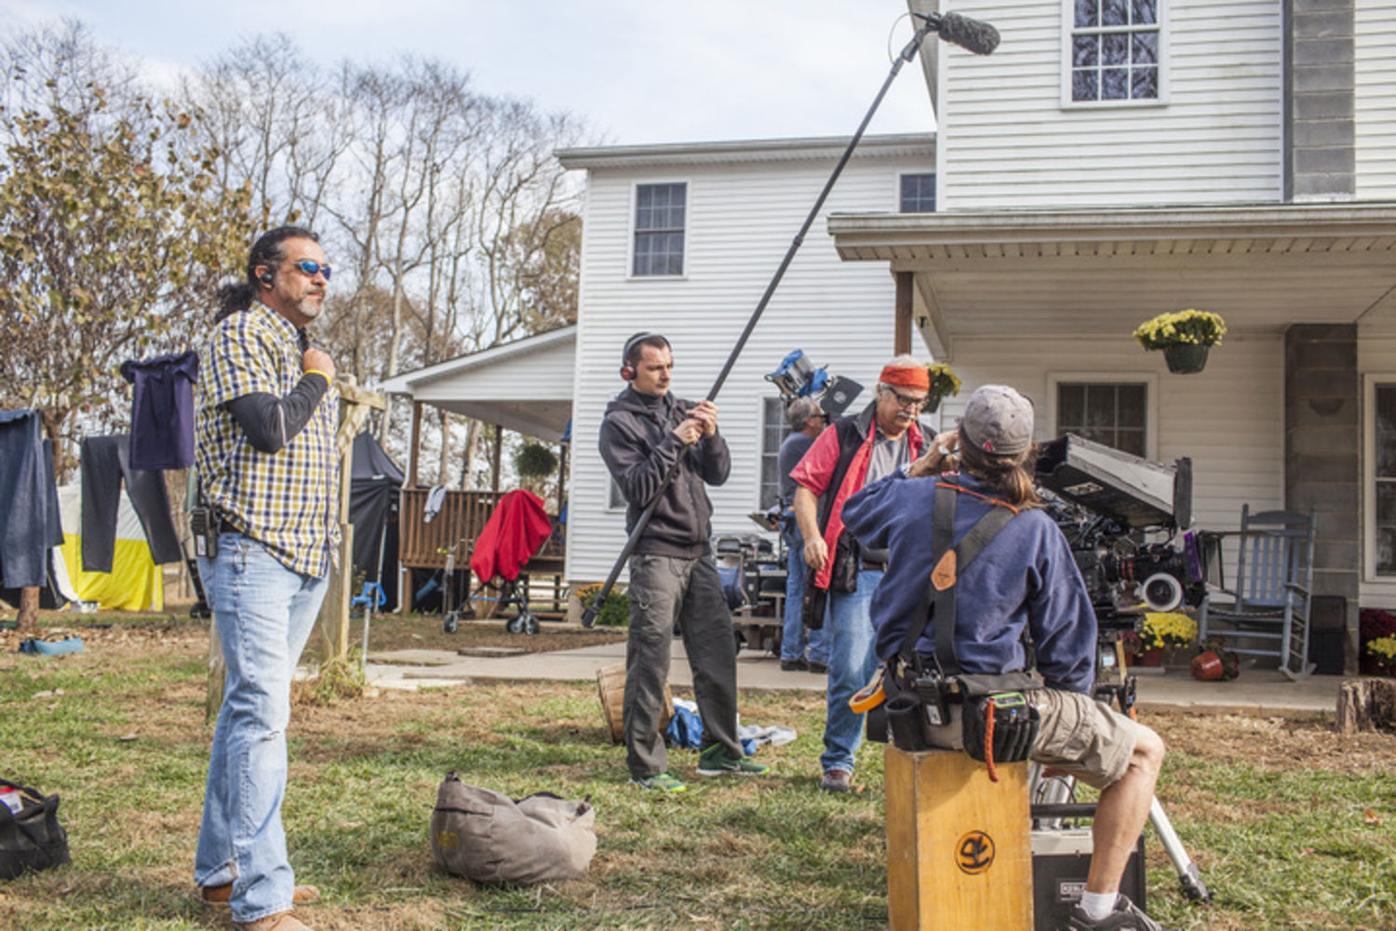 Hollywood, KY Movie being filmed in Hart County could be first of many News